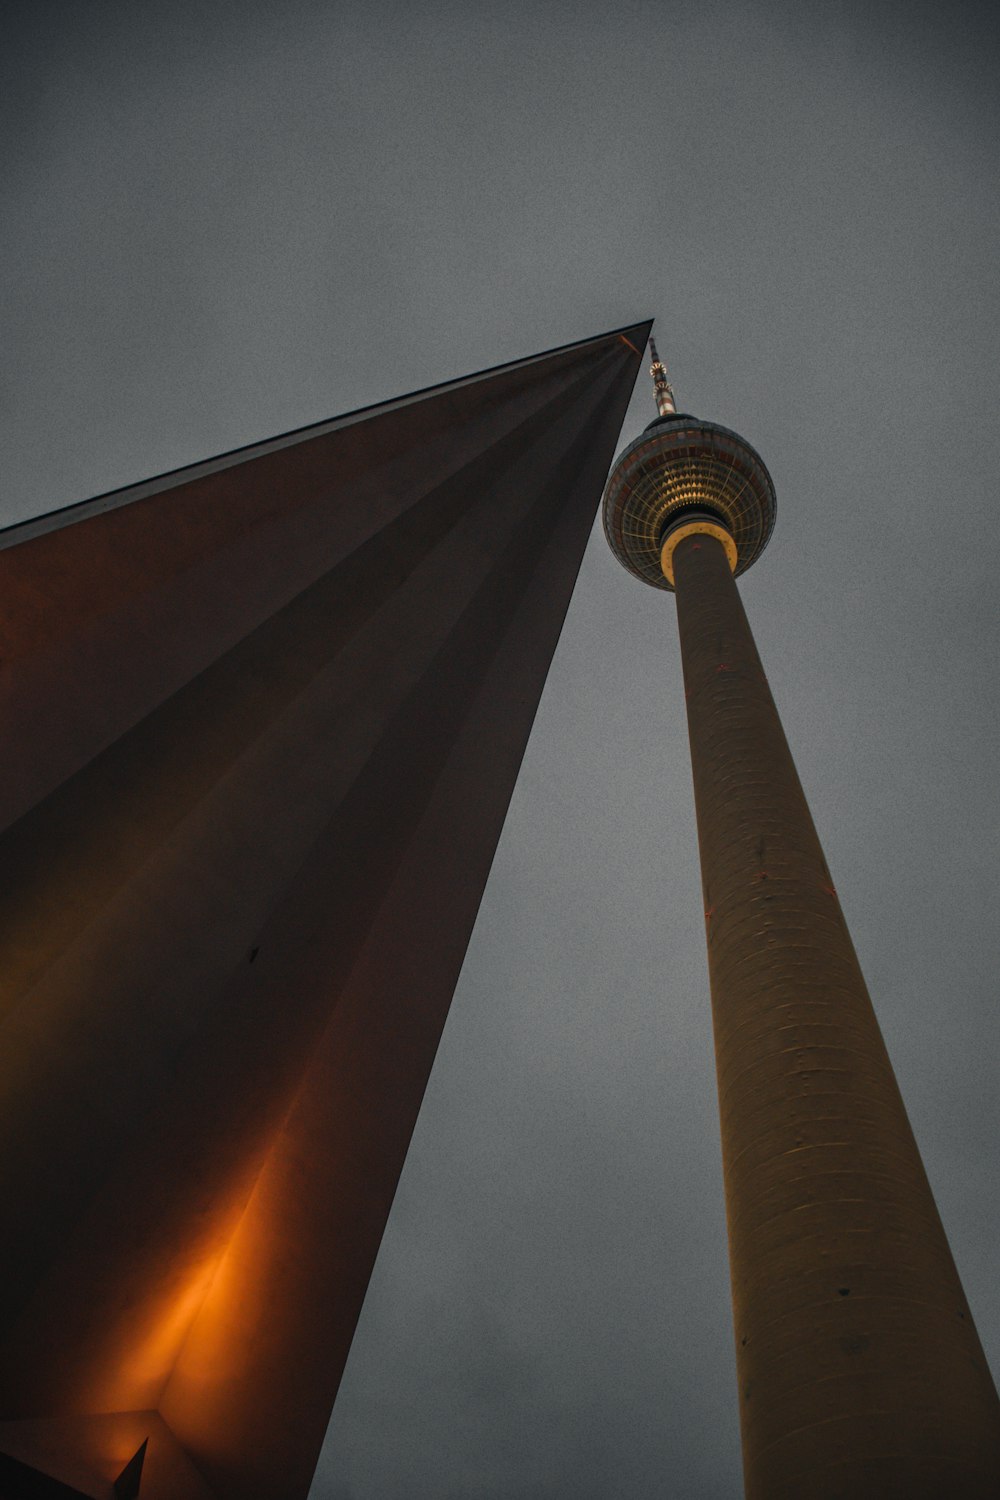 a tall tower with a light at the top